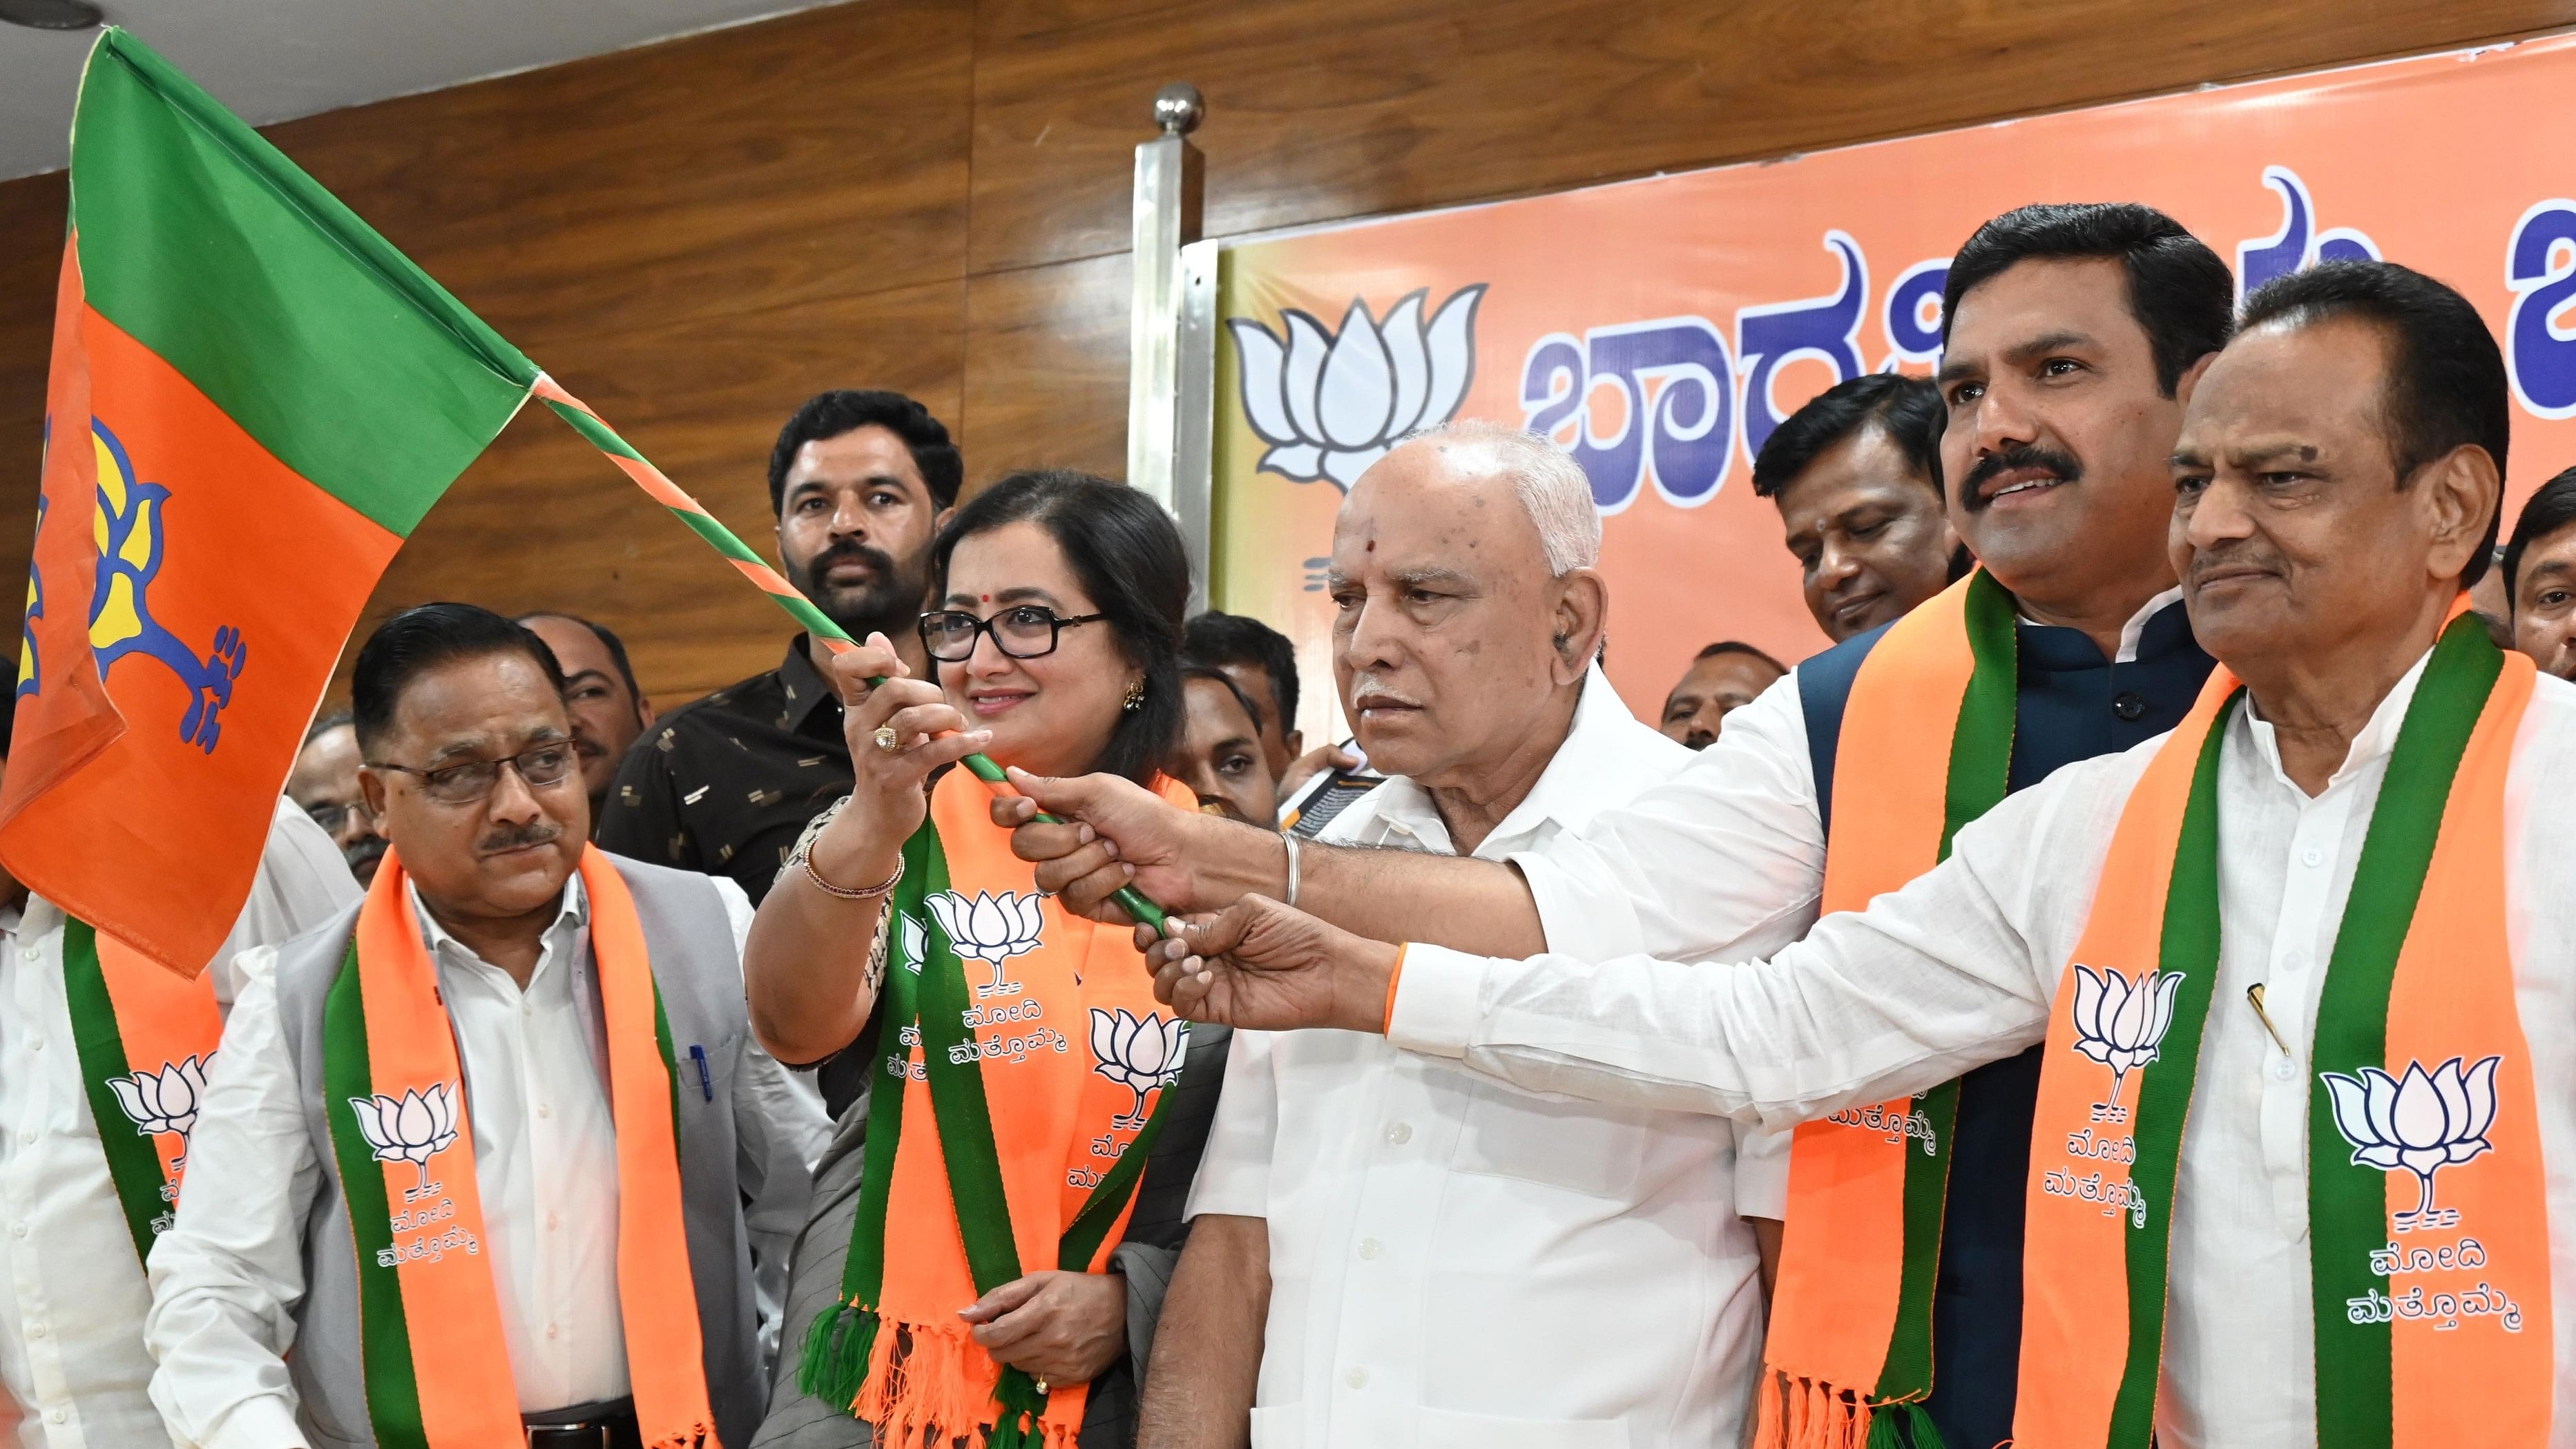 <div class="paragraphs"><p>Member of Parliament Sumalatha Ambareesh and Former Member of Parliament from Koppal Constituency S. Shivaramegowda (Extreme right) join BJP in the presence of State President B Y Vijayendra, Former Chief Ministers B S Yeddyurappa, D V Sadananda Gowda, State Election In-charge Radhamohandas Agrawal and Opposition leader R Ashok, at BJP State office in Bengaluru on Friday. </p></div>